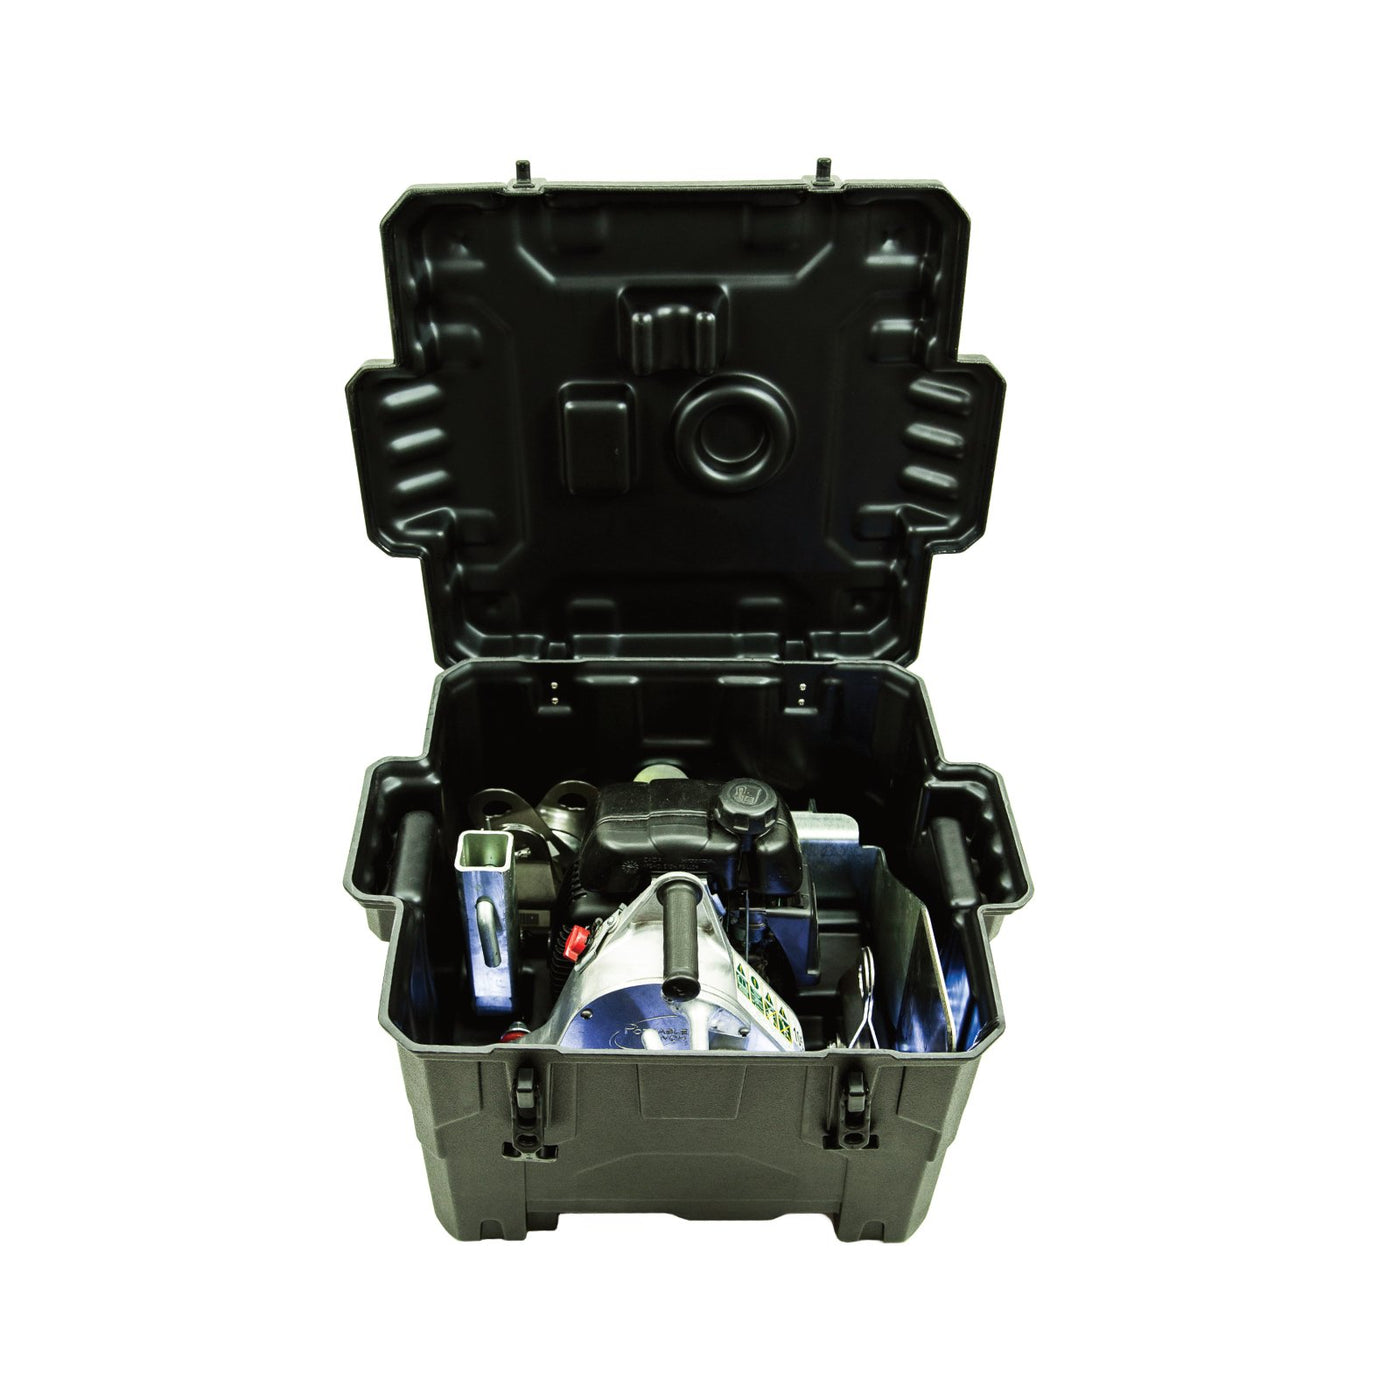 Molded Transport Case for PCW5000 and PCW5000-HS